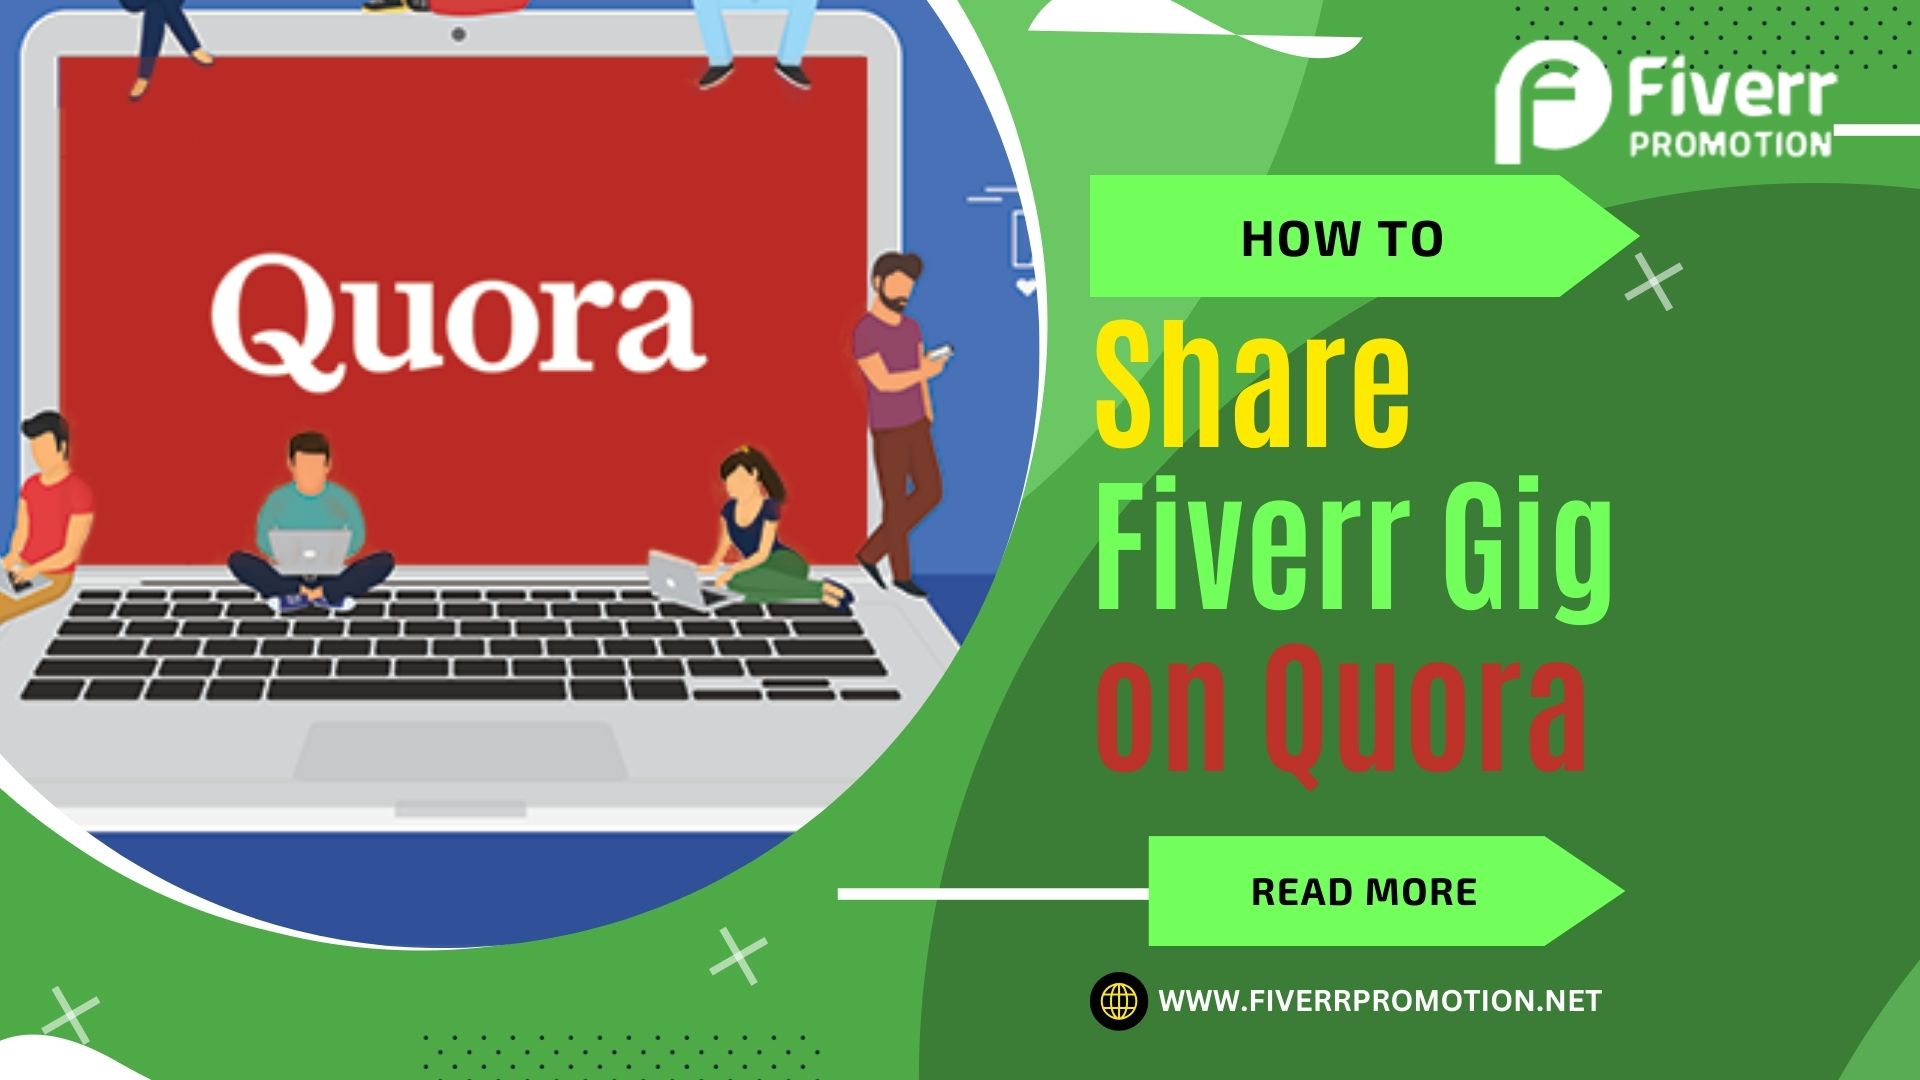 How to Share Fiverr Gig on Quora